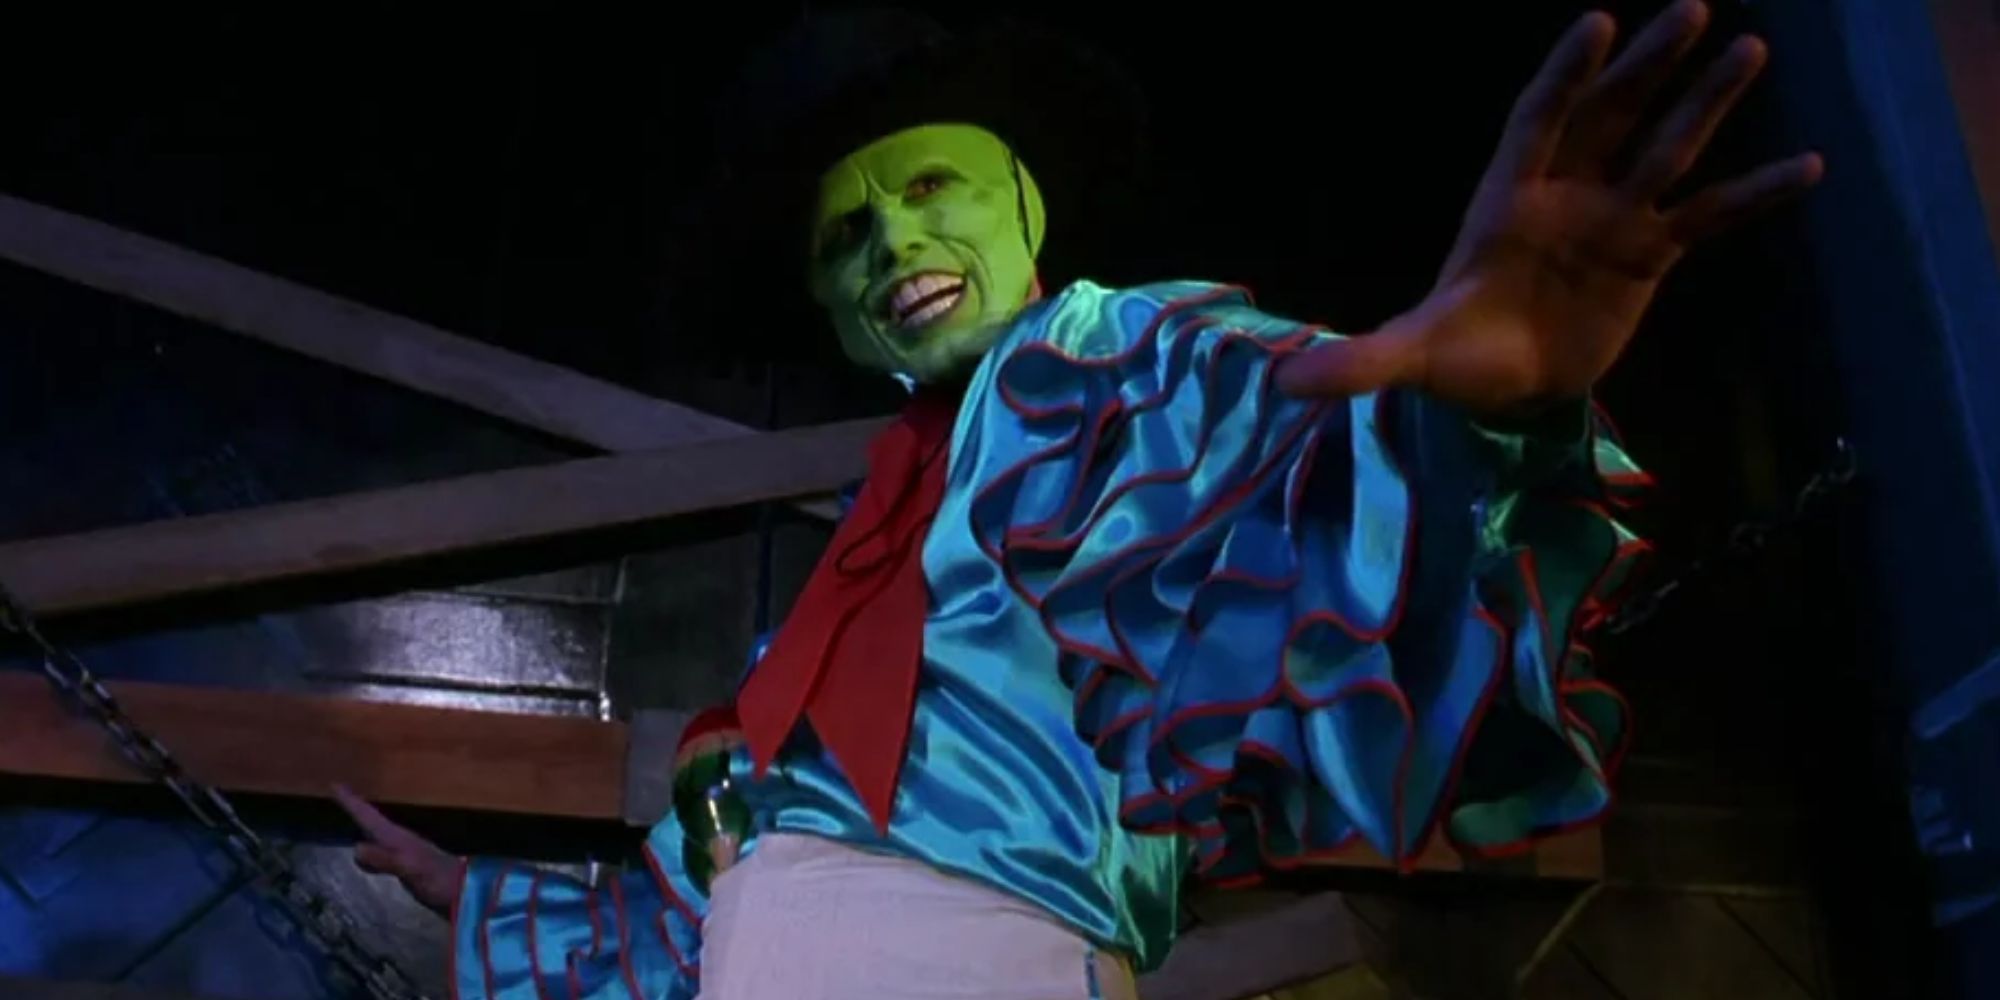 Jim Carrey as the Mask dances during the Cuban Pete dance number in The Mask